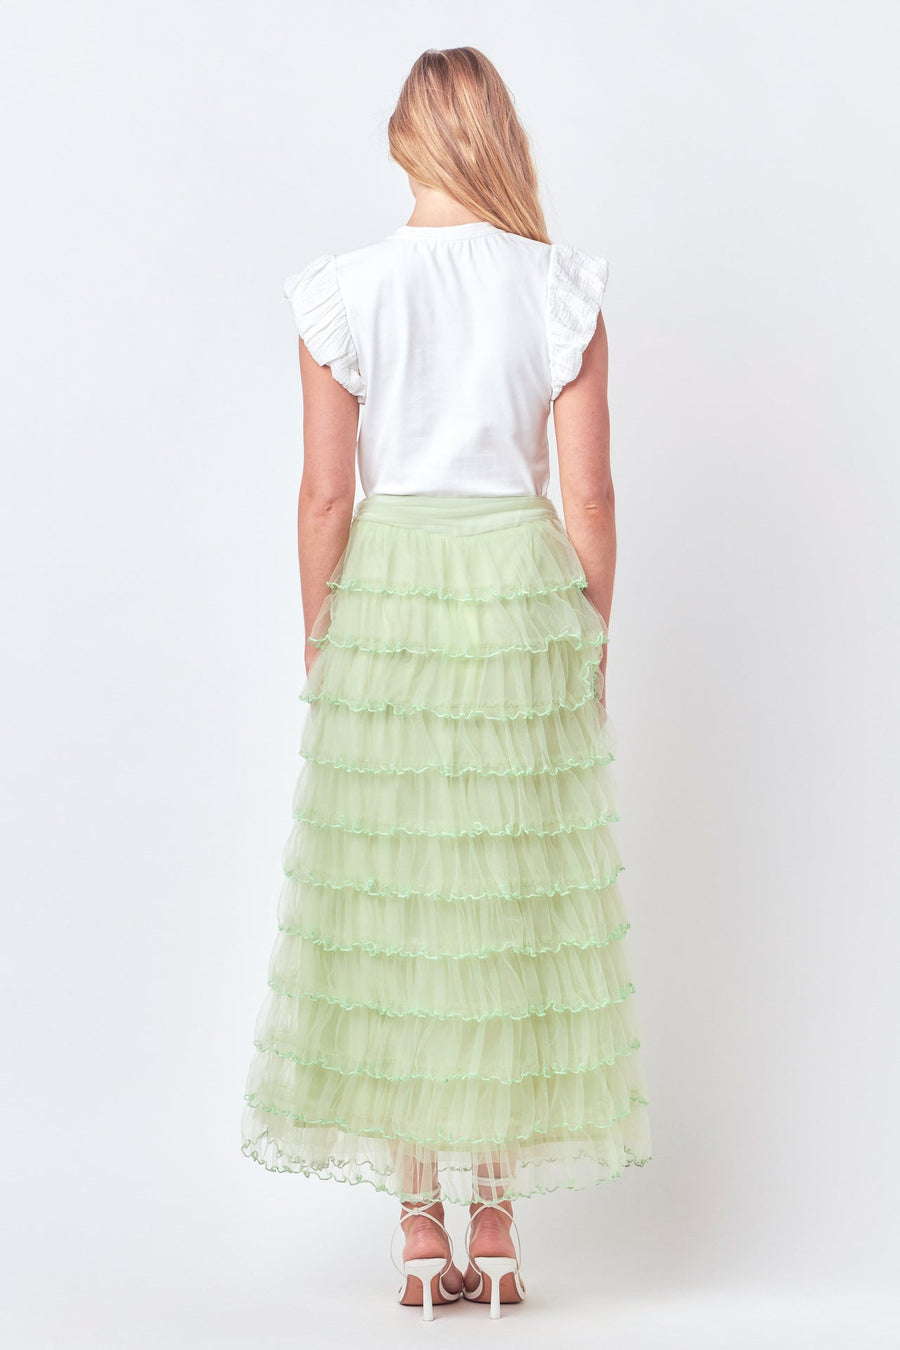 FREE THE ROSES-Layered Tulle Midi Skirt-SKIRTS available at Objectrare